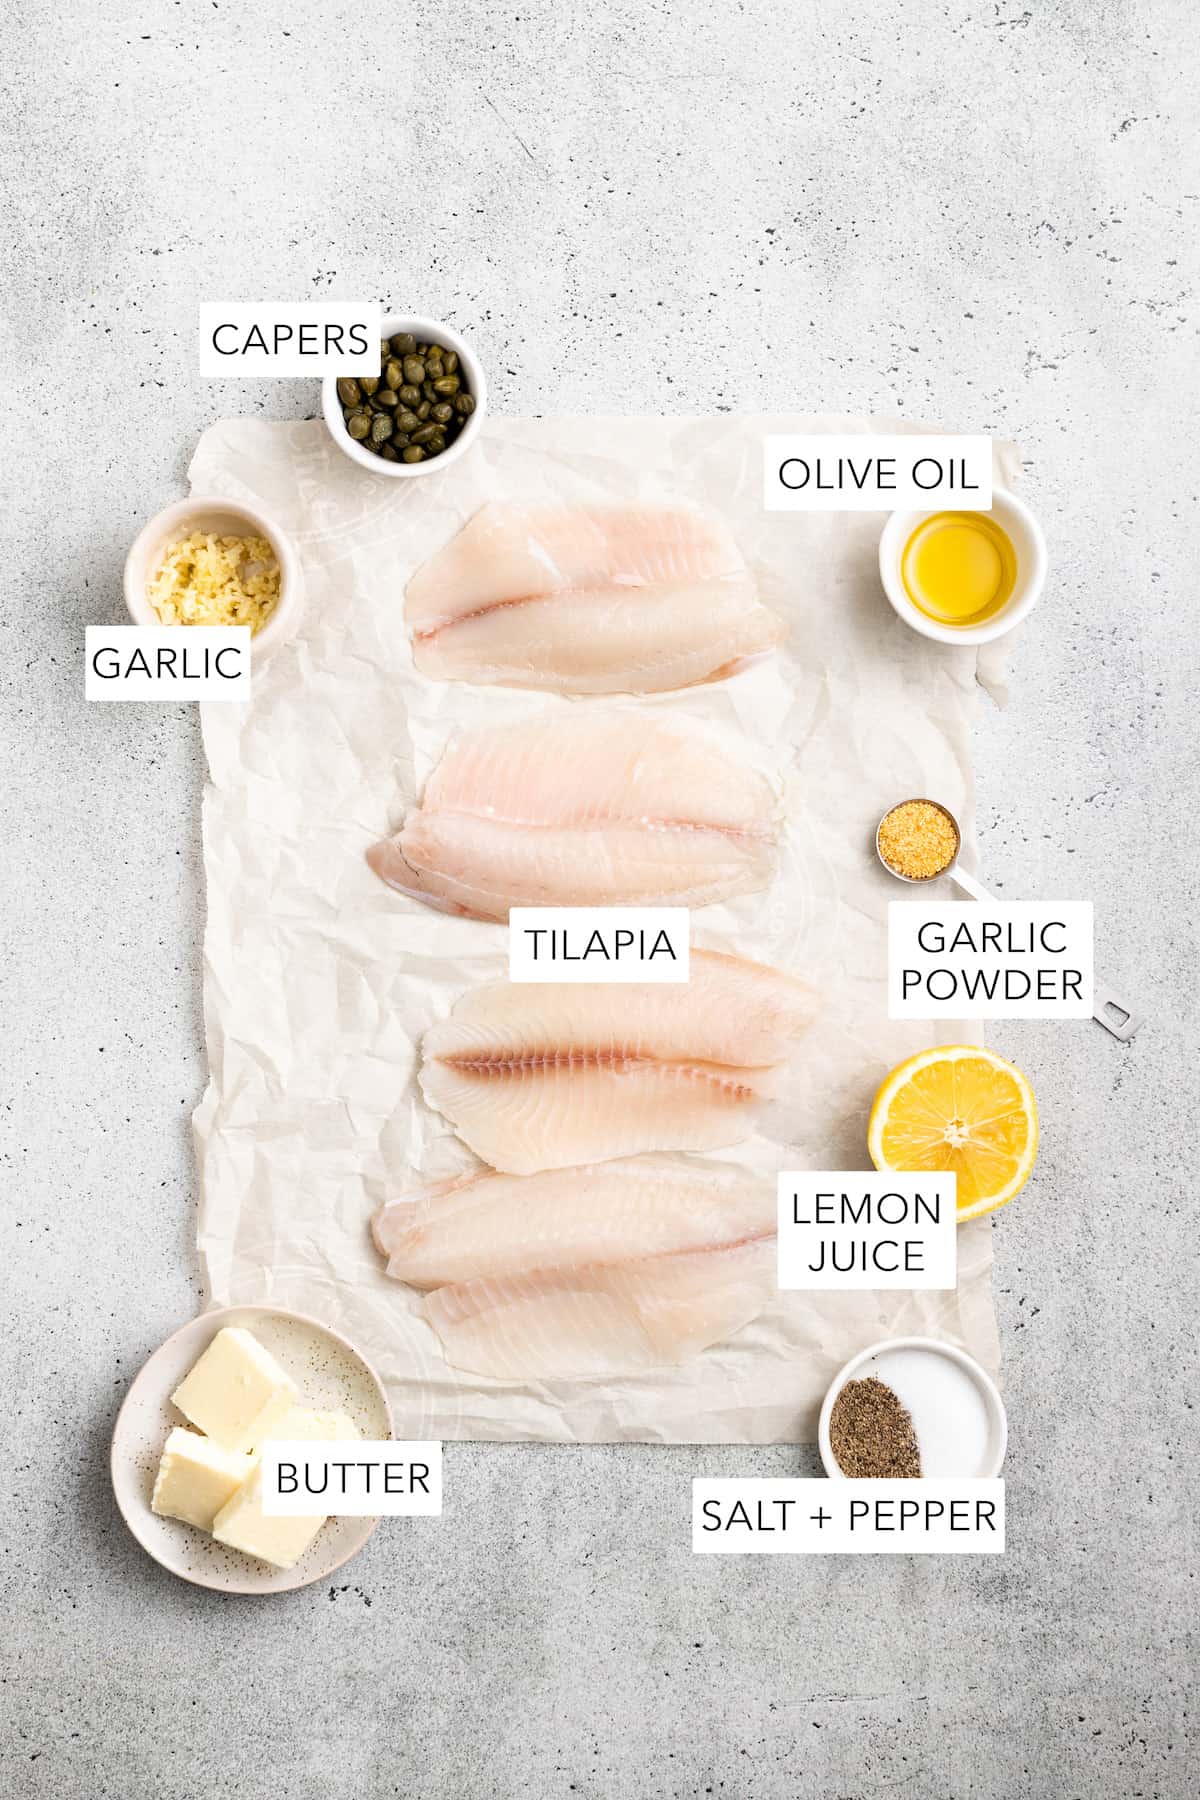 Ingredients for air fryer tilapia separated and labeled.